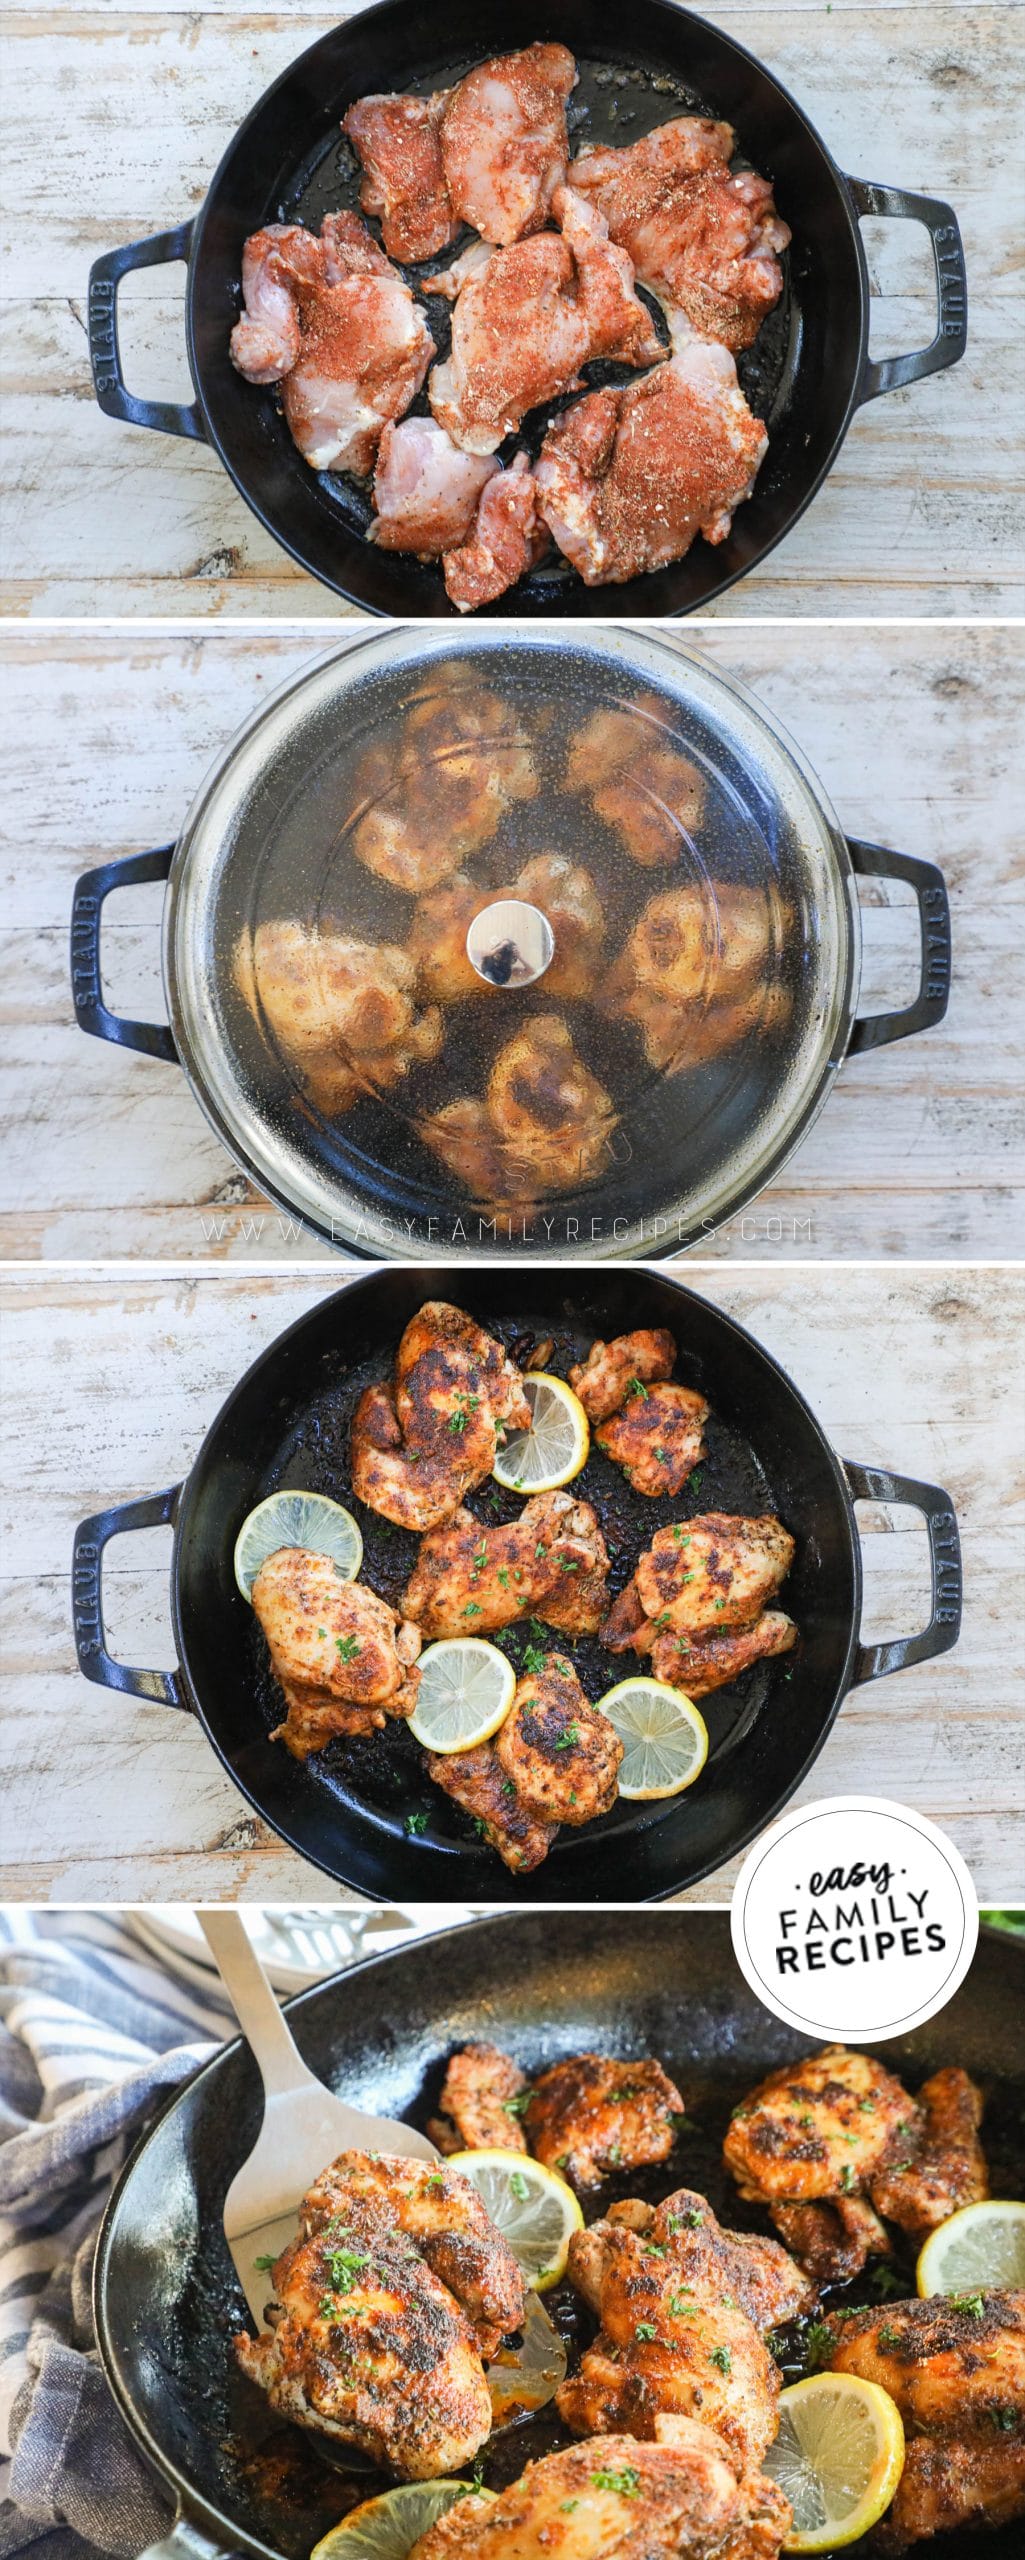 How to cook blackened chicken thighs 1) Season and sear the chicken 2) Flip and cover 3) Finish with lemon slices if desired 4) Serve chicken 